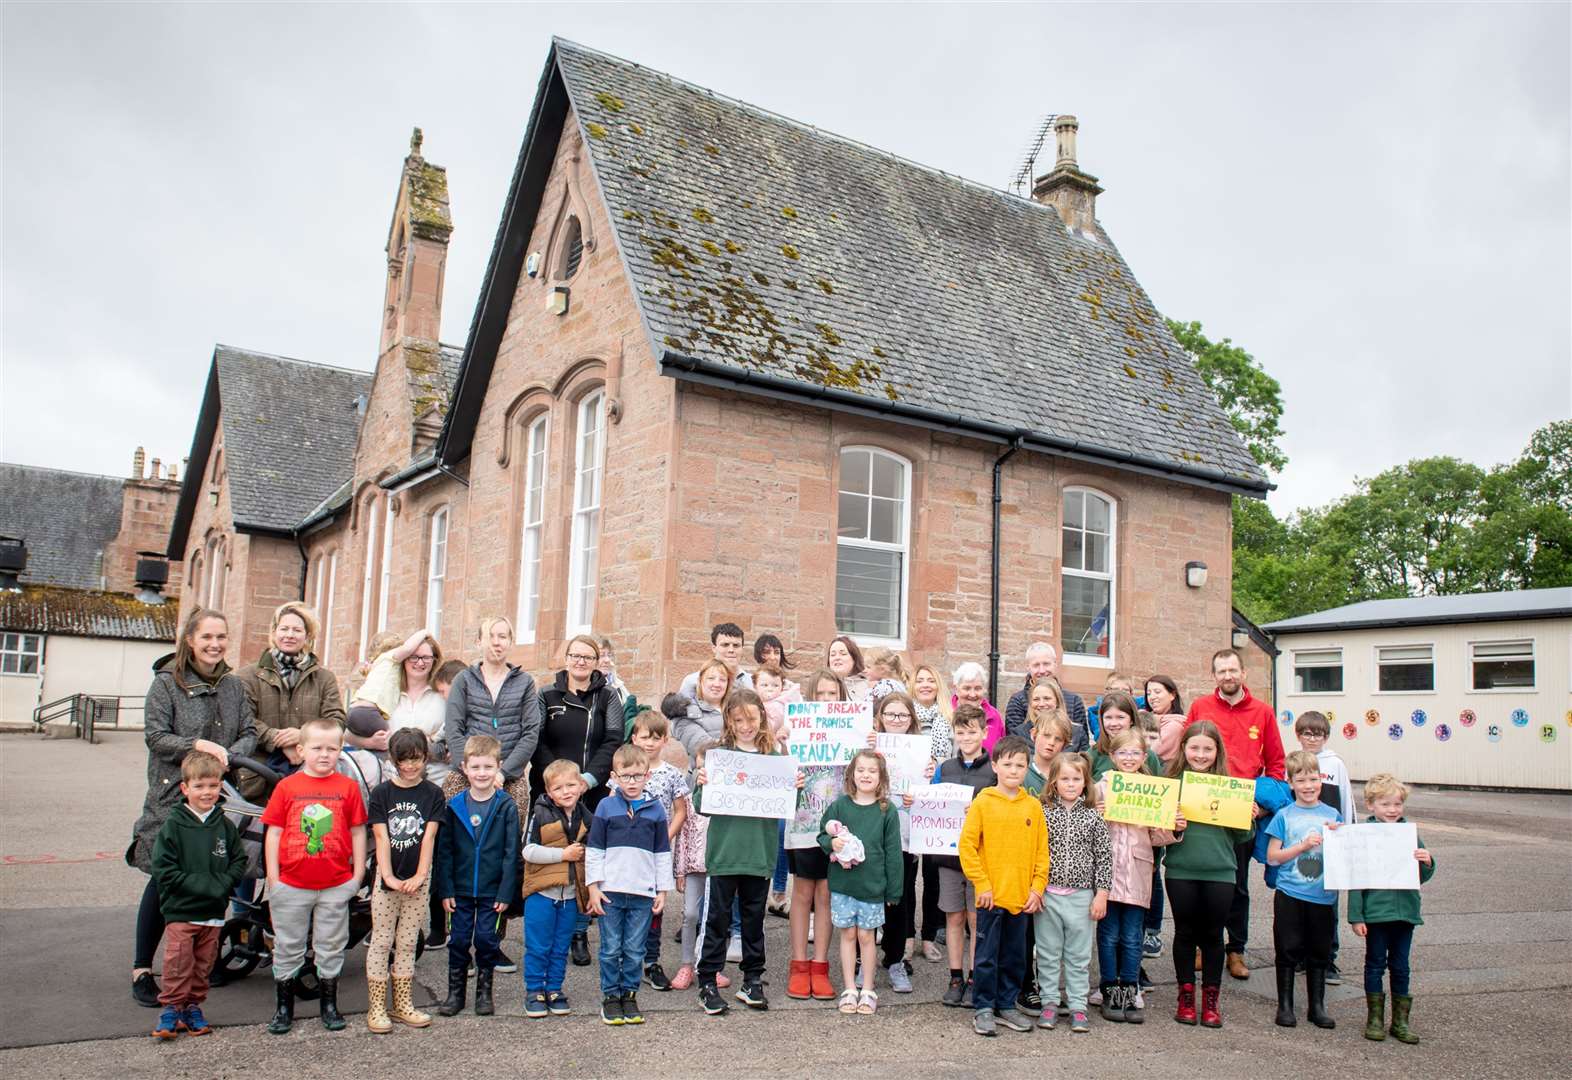 Parents and children call for no more delays to a long-promised primary school in Beauly.